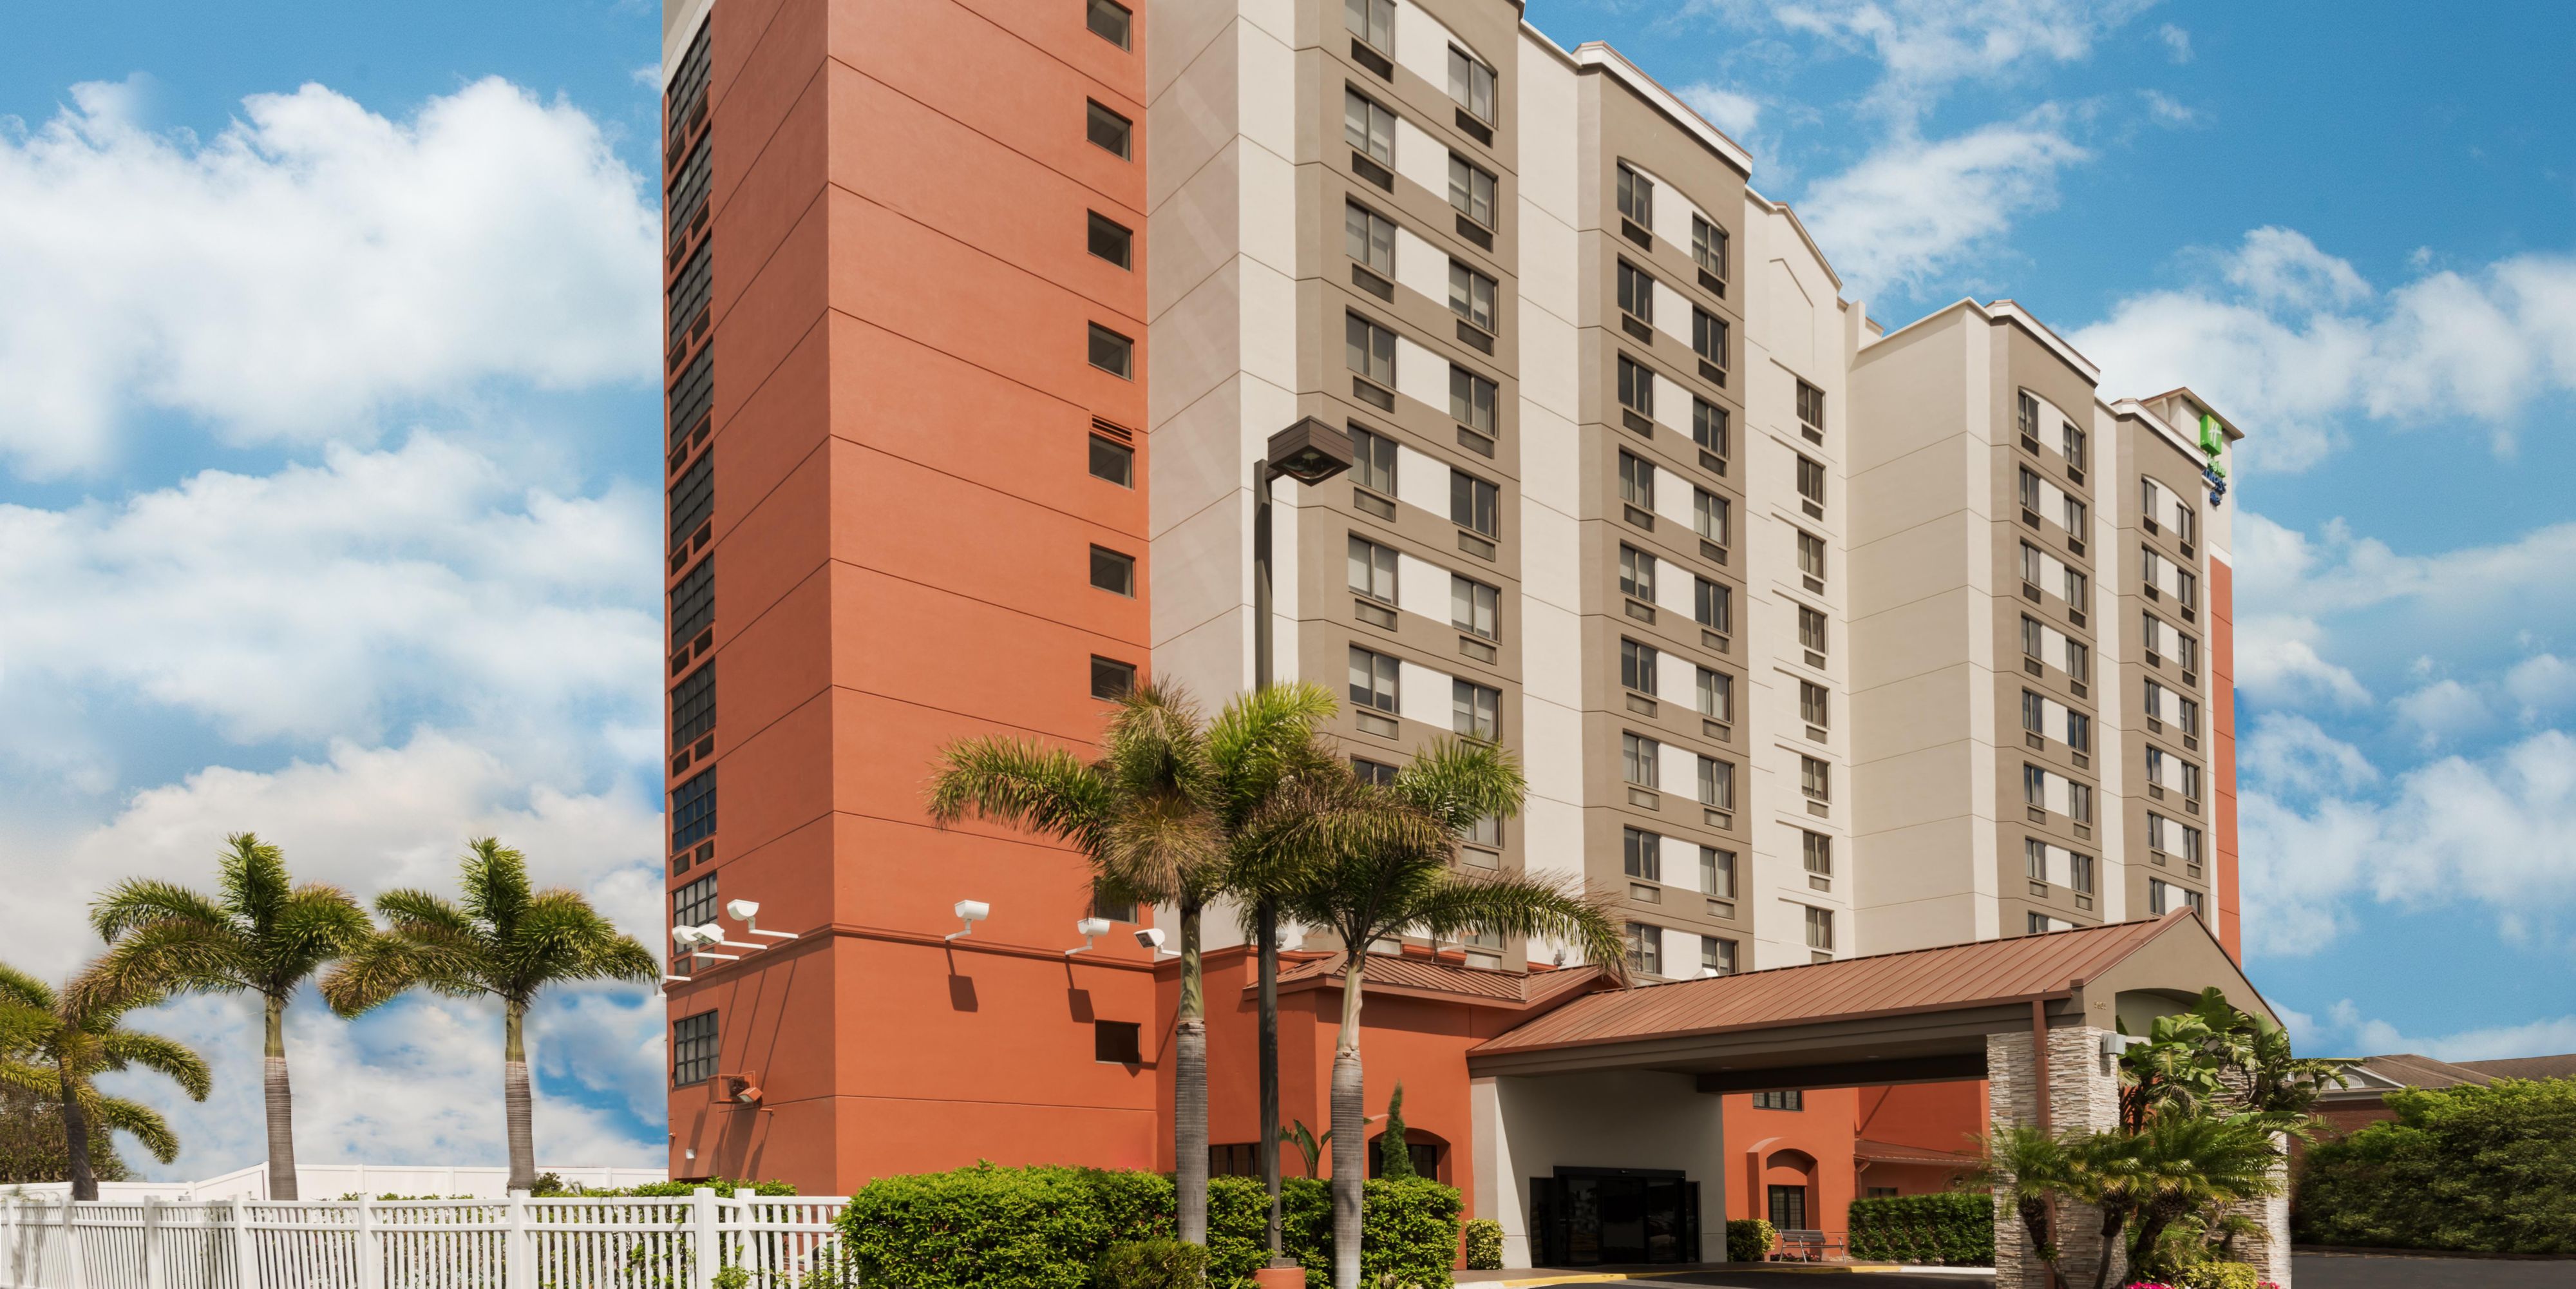 As a Universal Partner Hotel, we were chosen based on quality, reputation, and proximity to Universal Orlando Resort. Guests staying at our hotel can also enjoy free scheduled transportation to Universal Orlando theme parks and access to an onsite Universal Vacation Planning Center located in the hotel’s lobby.